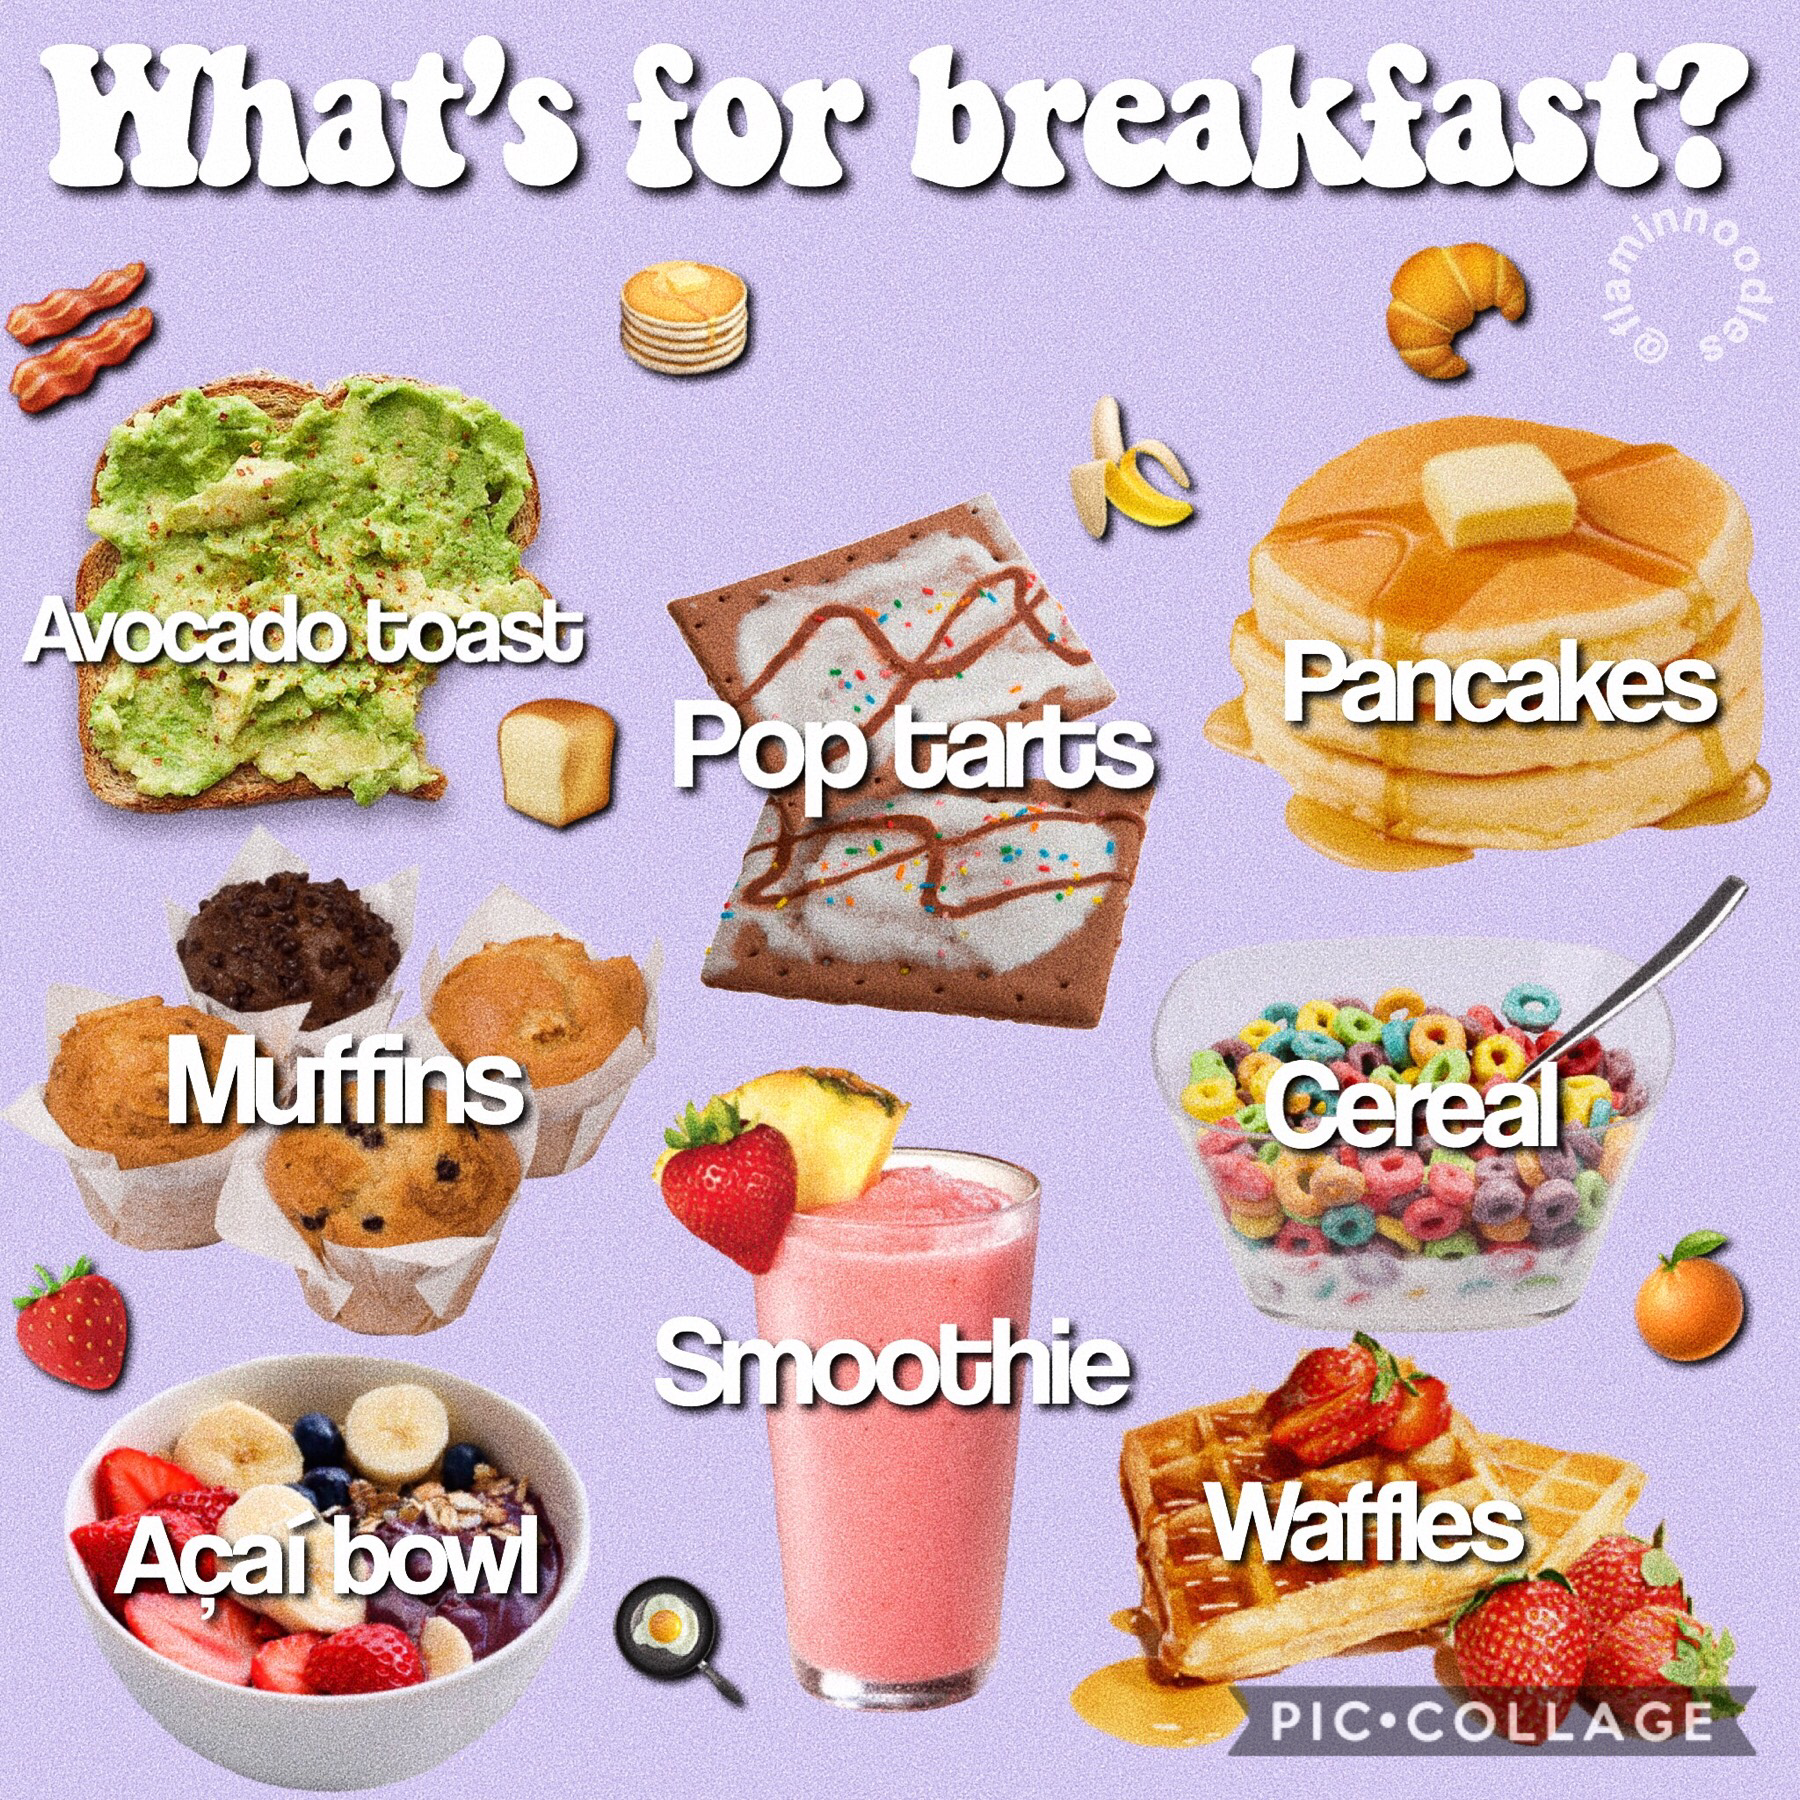 ☁️tap☁️
Comment which meal you’re having for breakfast
- sorry it took so long to post, I’m going to try and post more often :)
- ✨Qotd: did you eat breakfast this morning?
